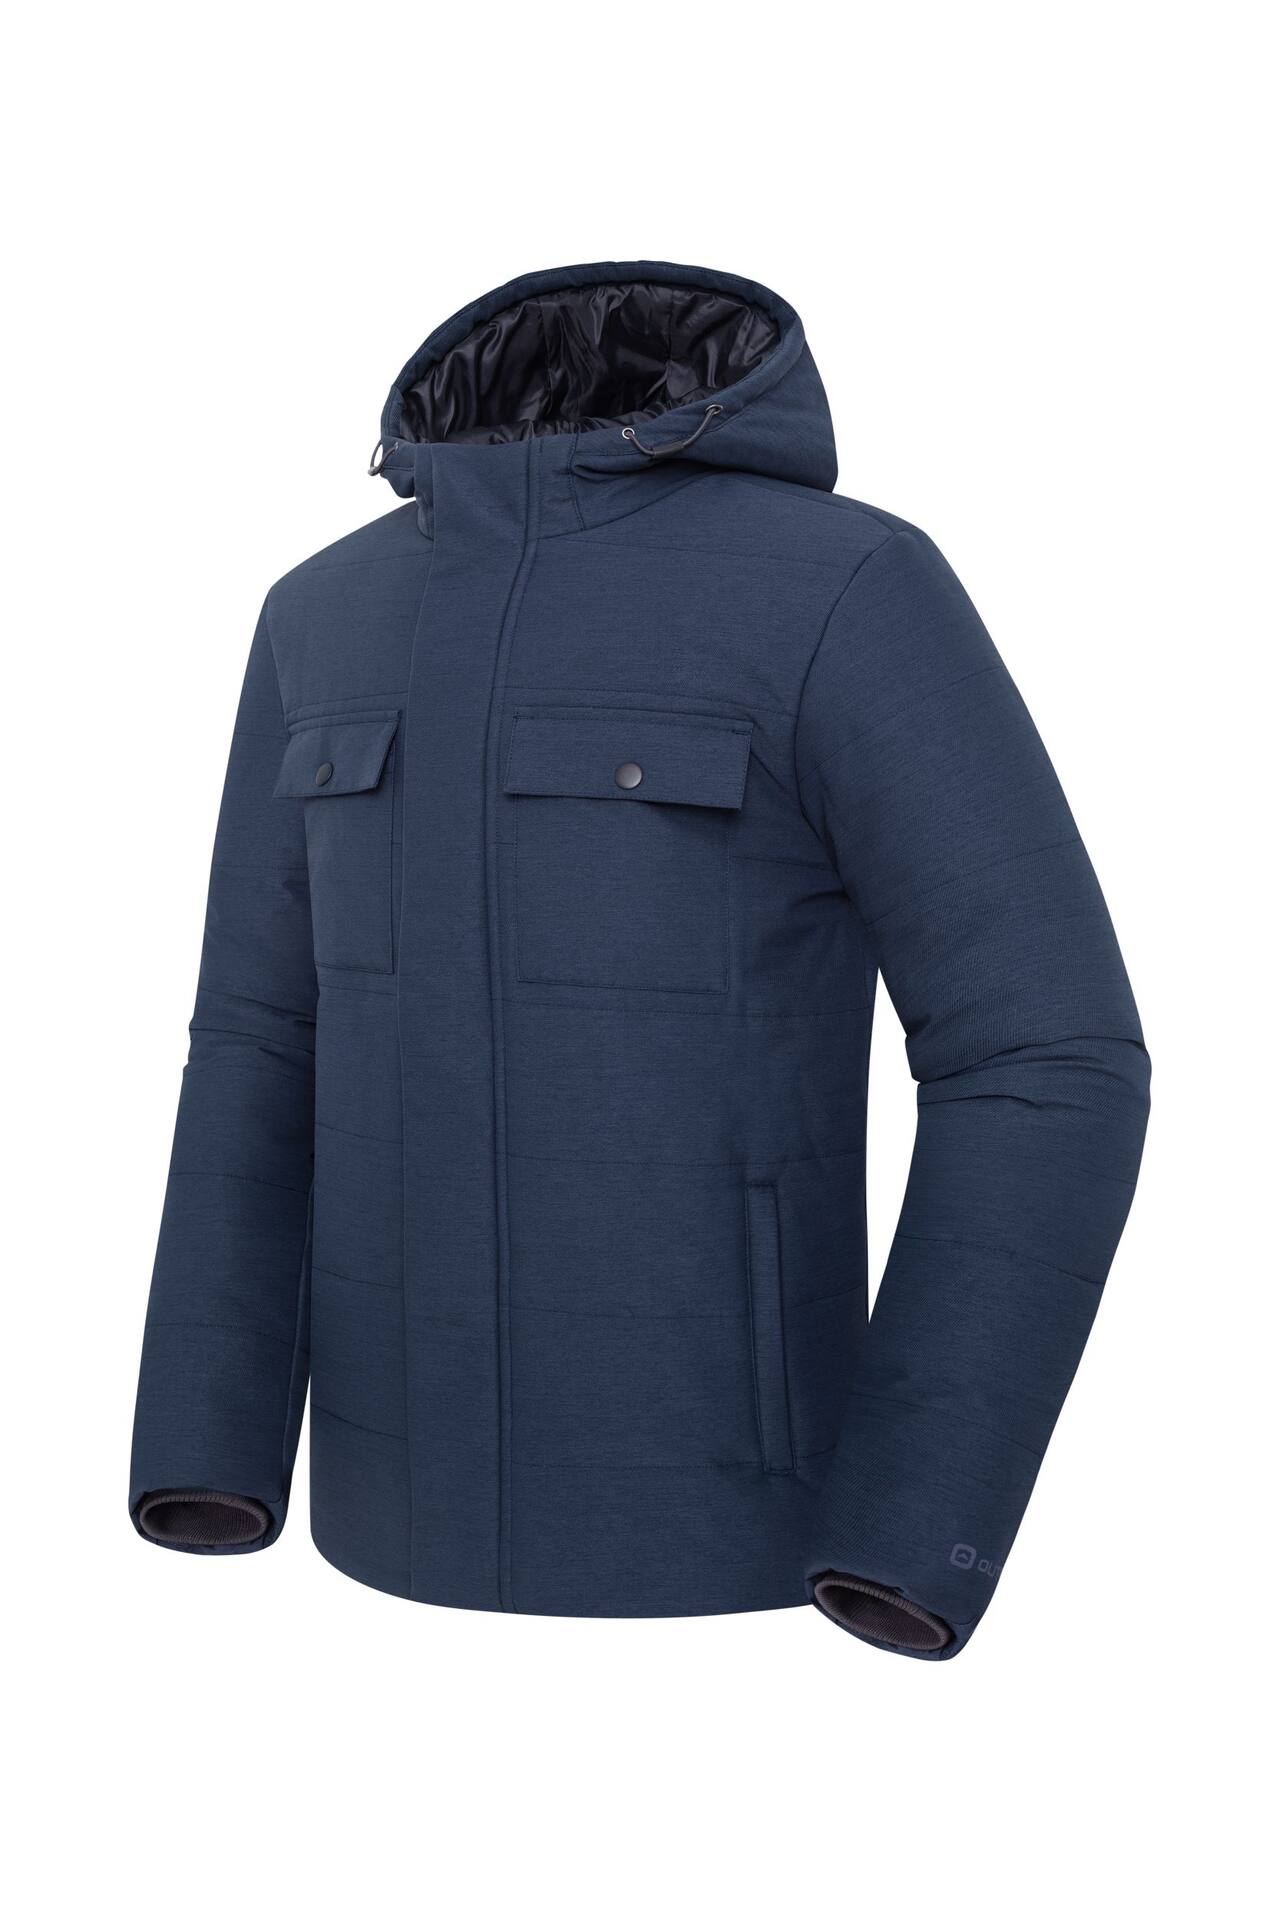 Outbound Men's Pine Insulated Jacket, Navy | Canadian Tire